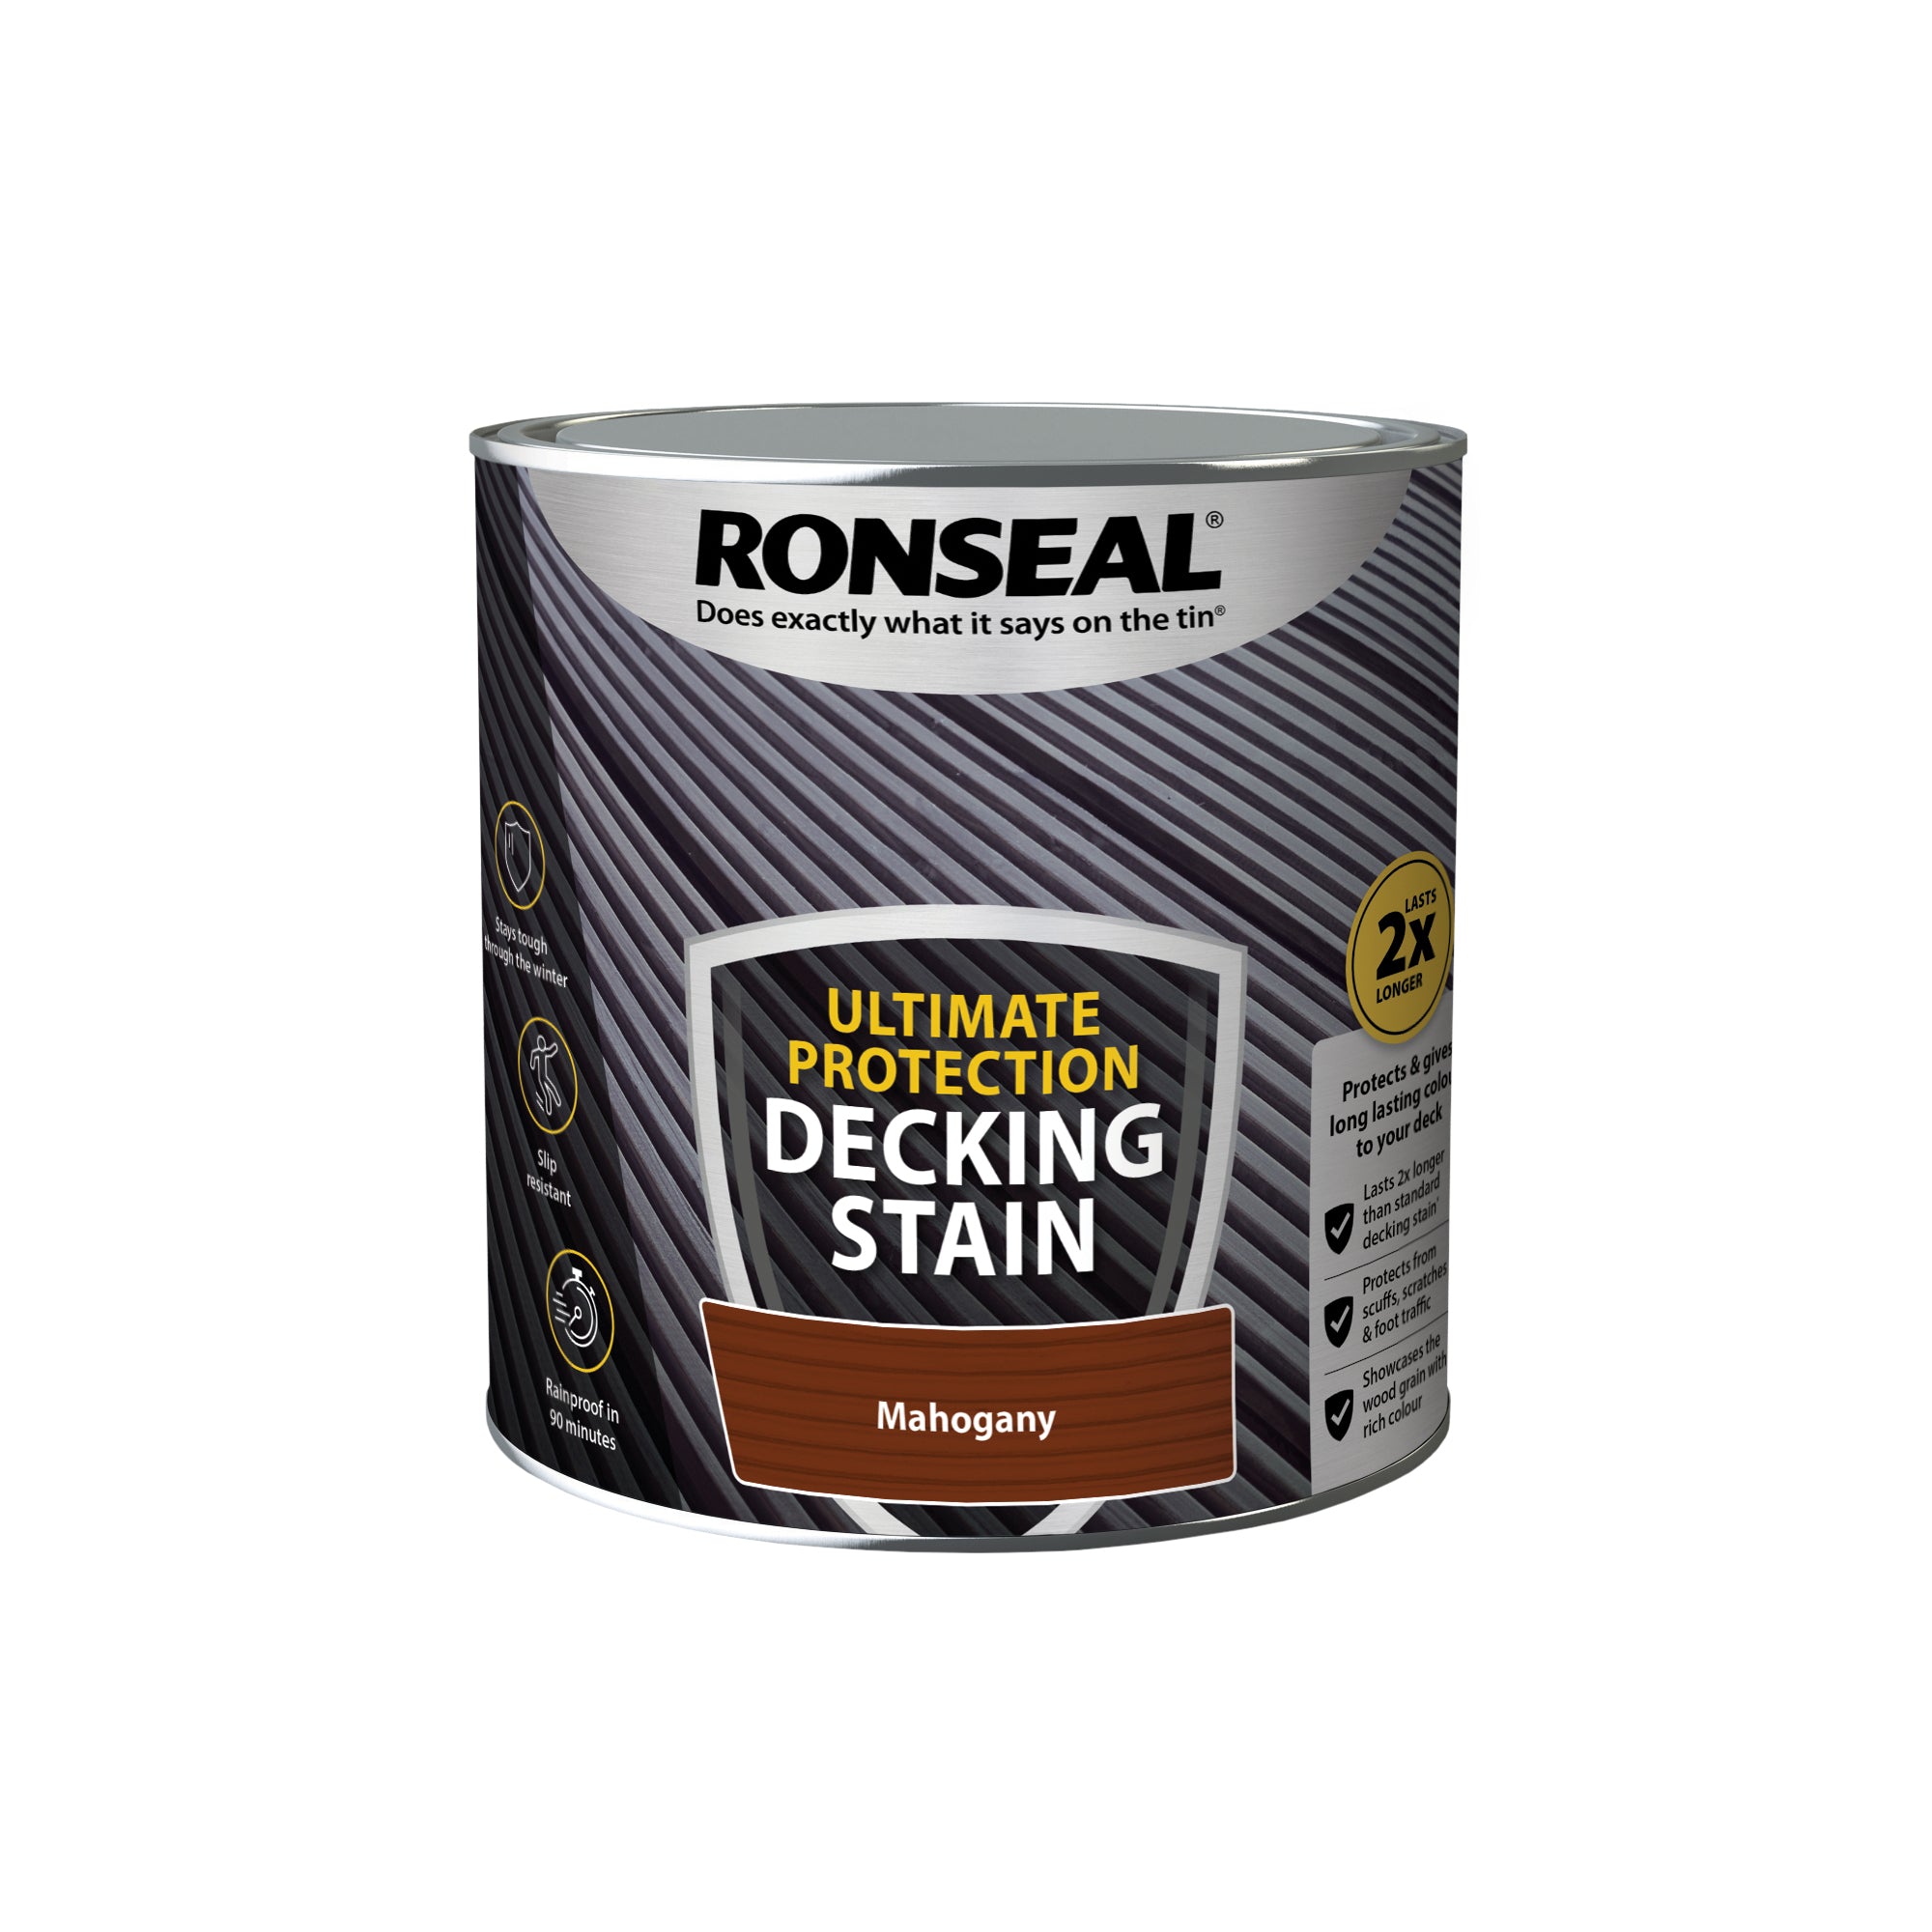 Ronseal-Ultimate-Protection-Decking-Stain-Rich-Mahogany-2.5L